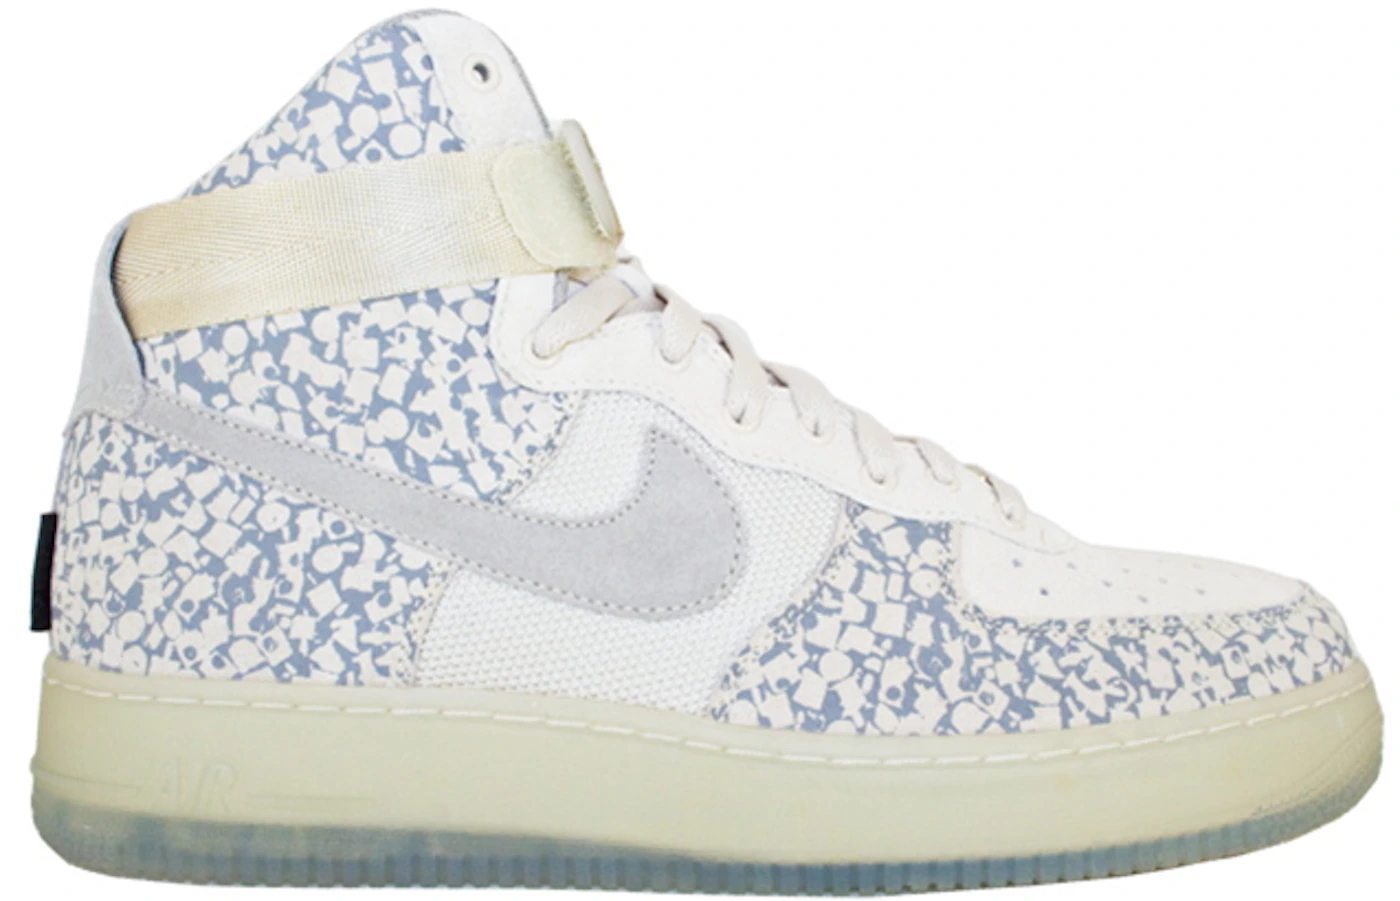 encender un fuego marea tanto Nike Air Force 1 High Stash One Night Only - FA07-ND-I8M, 307064-001,  307064-002, 307064-003 - ES